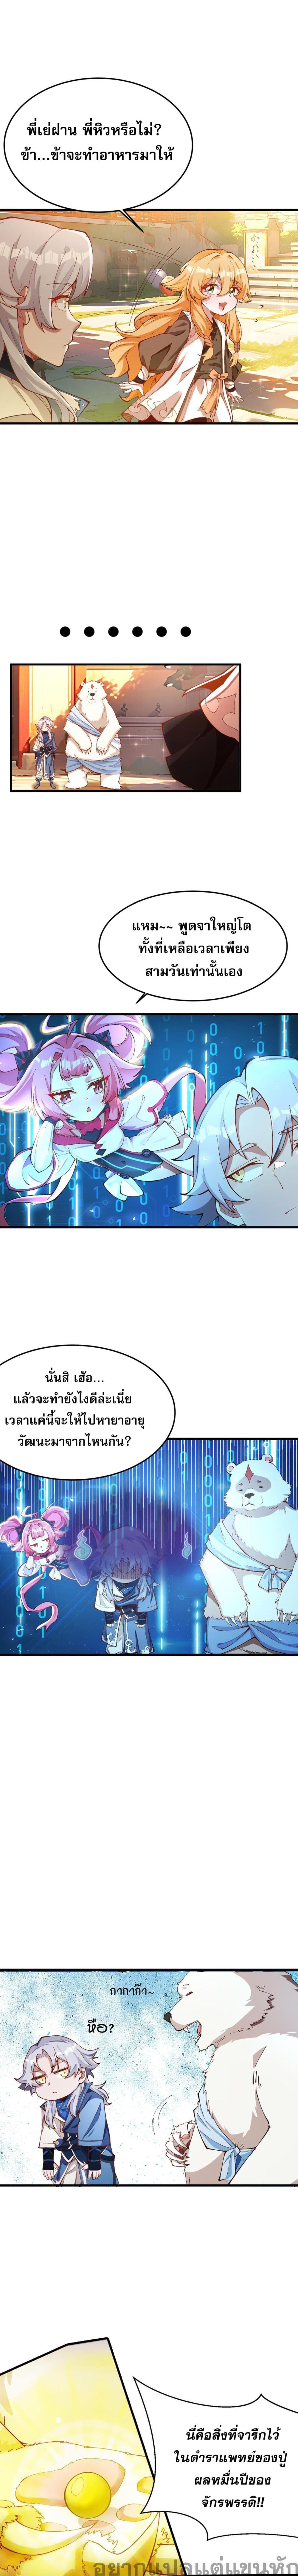 I Have Hundreds of Millions of Years of Cultivation ข้ามีพลังบำเพ็ญหนึ่งล้านปี 9-9